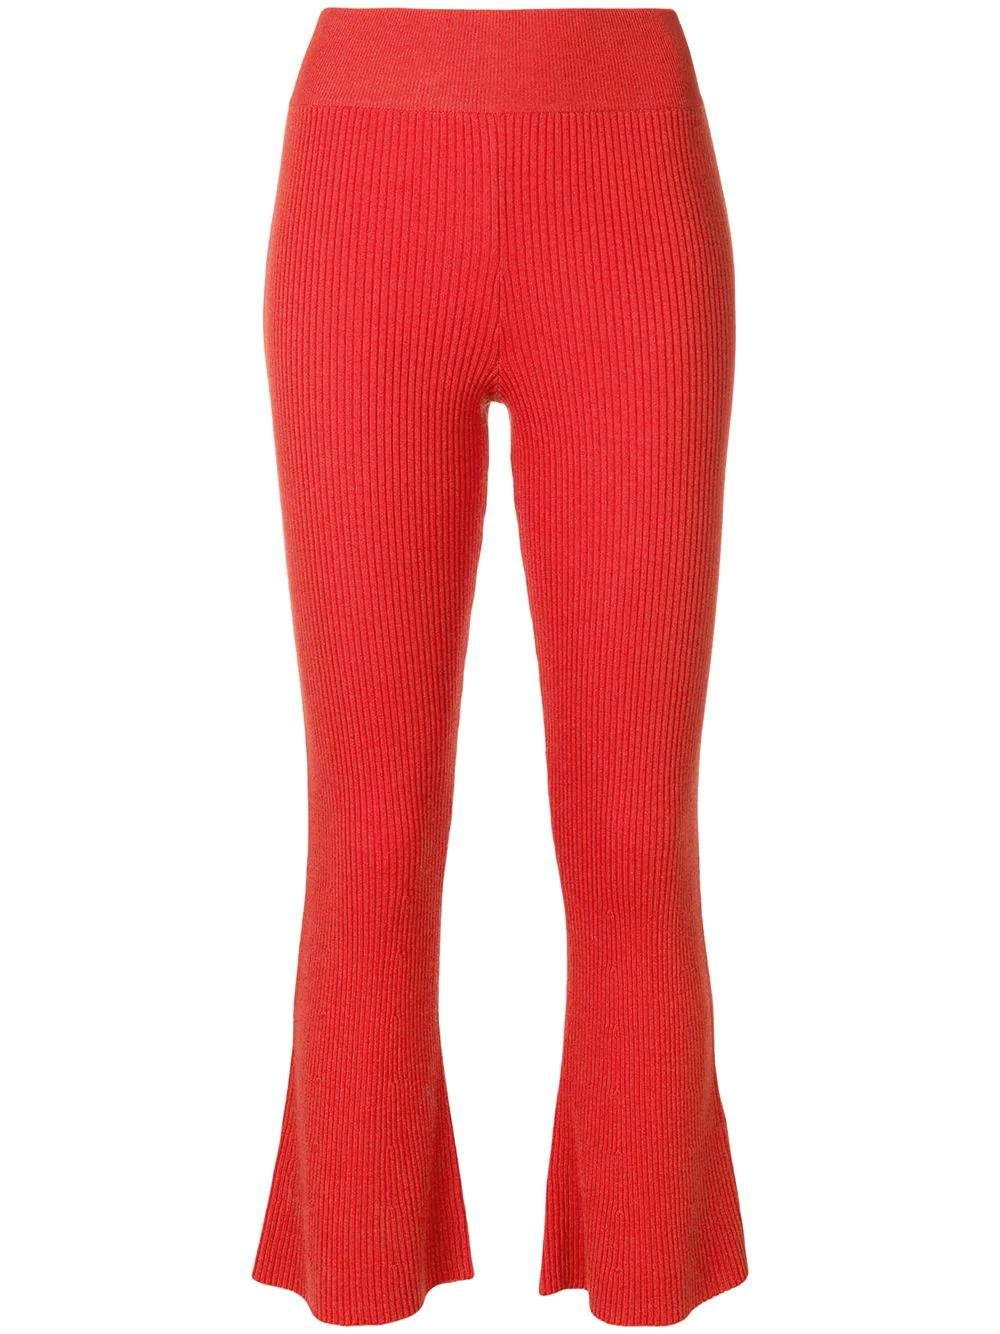 Tilly ribbed trousers by CASHMERE IN LOVE